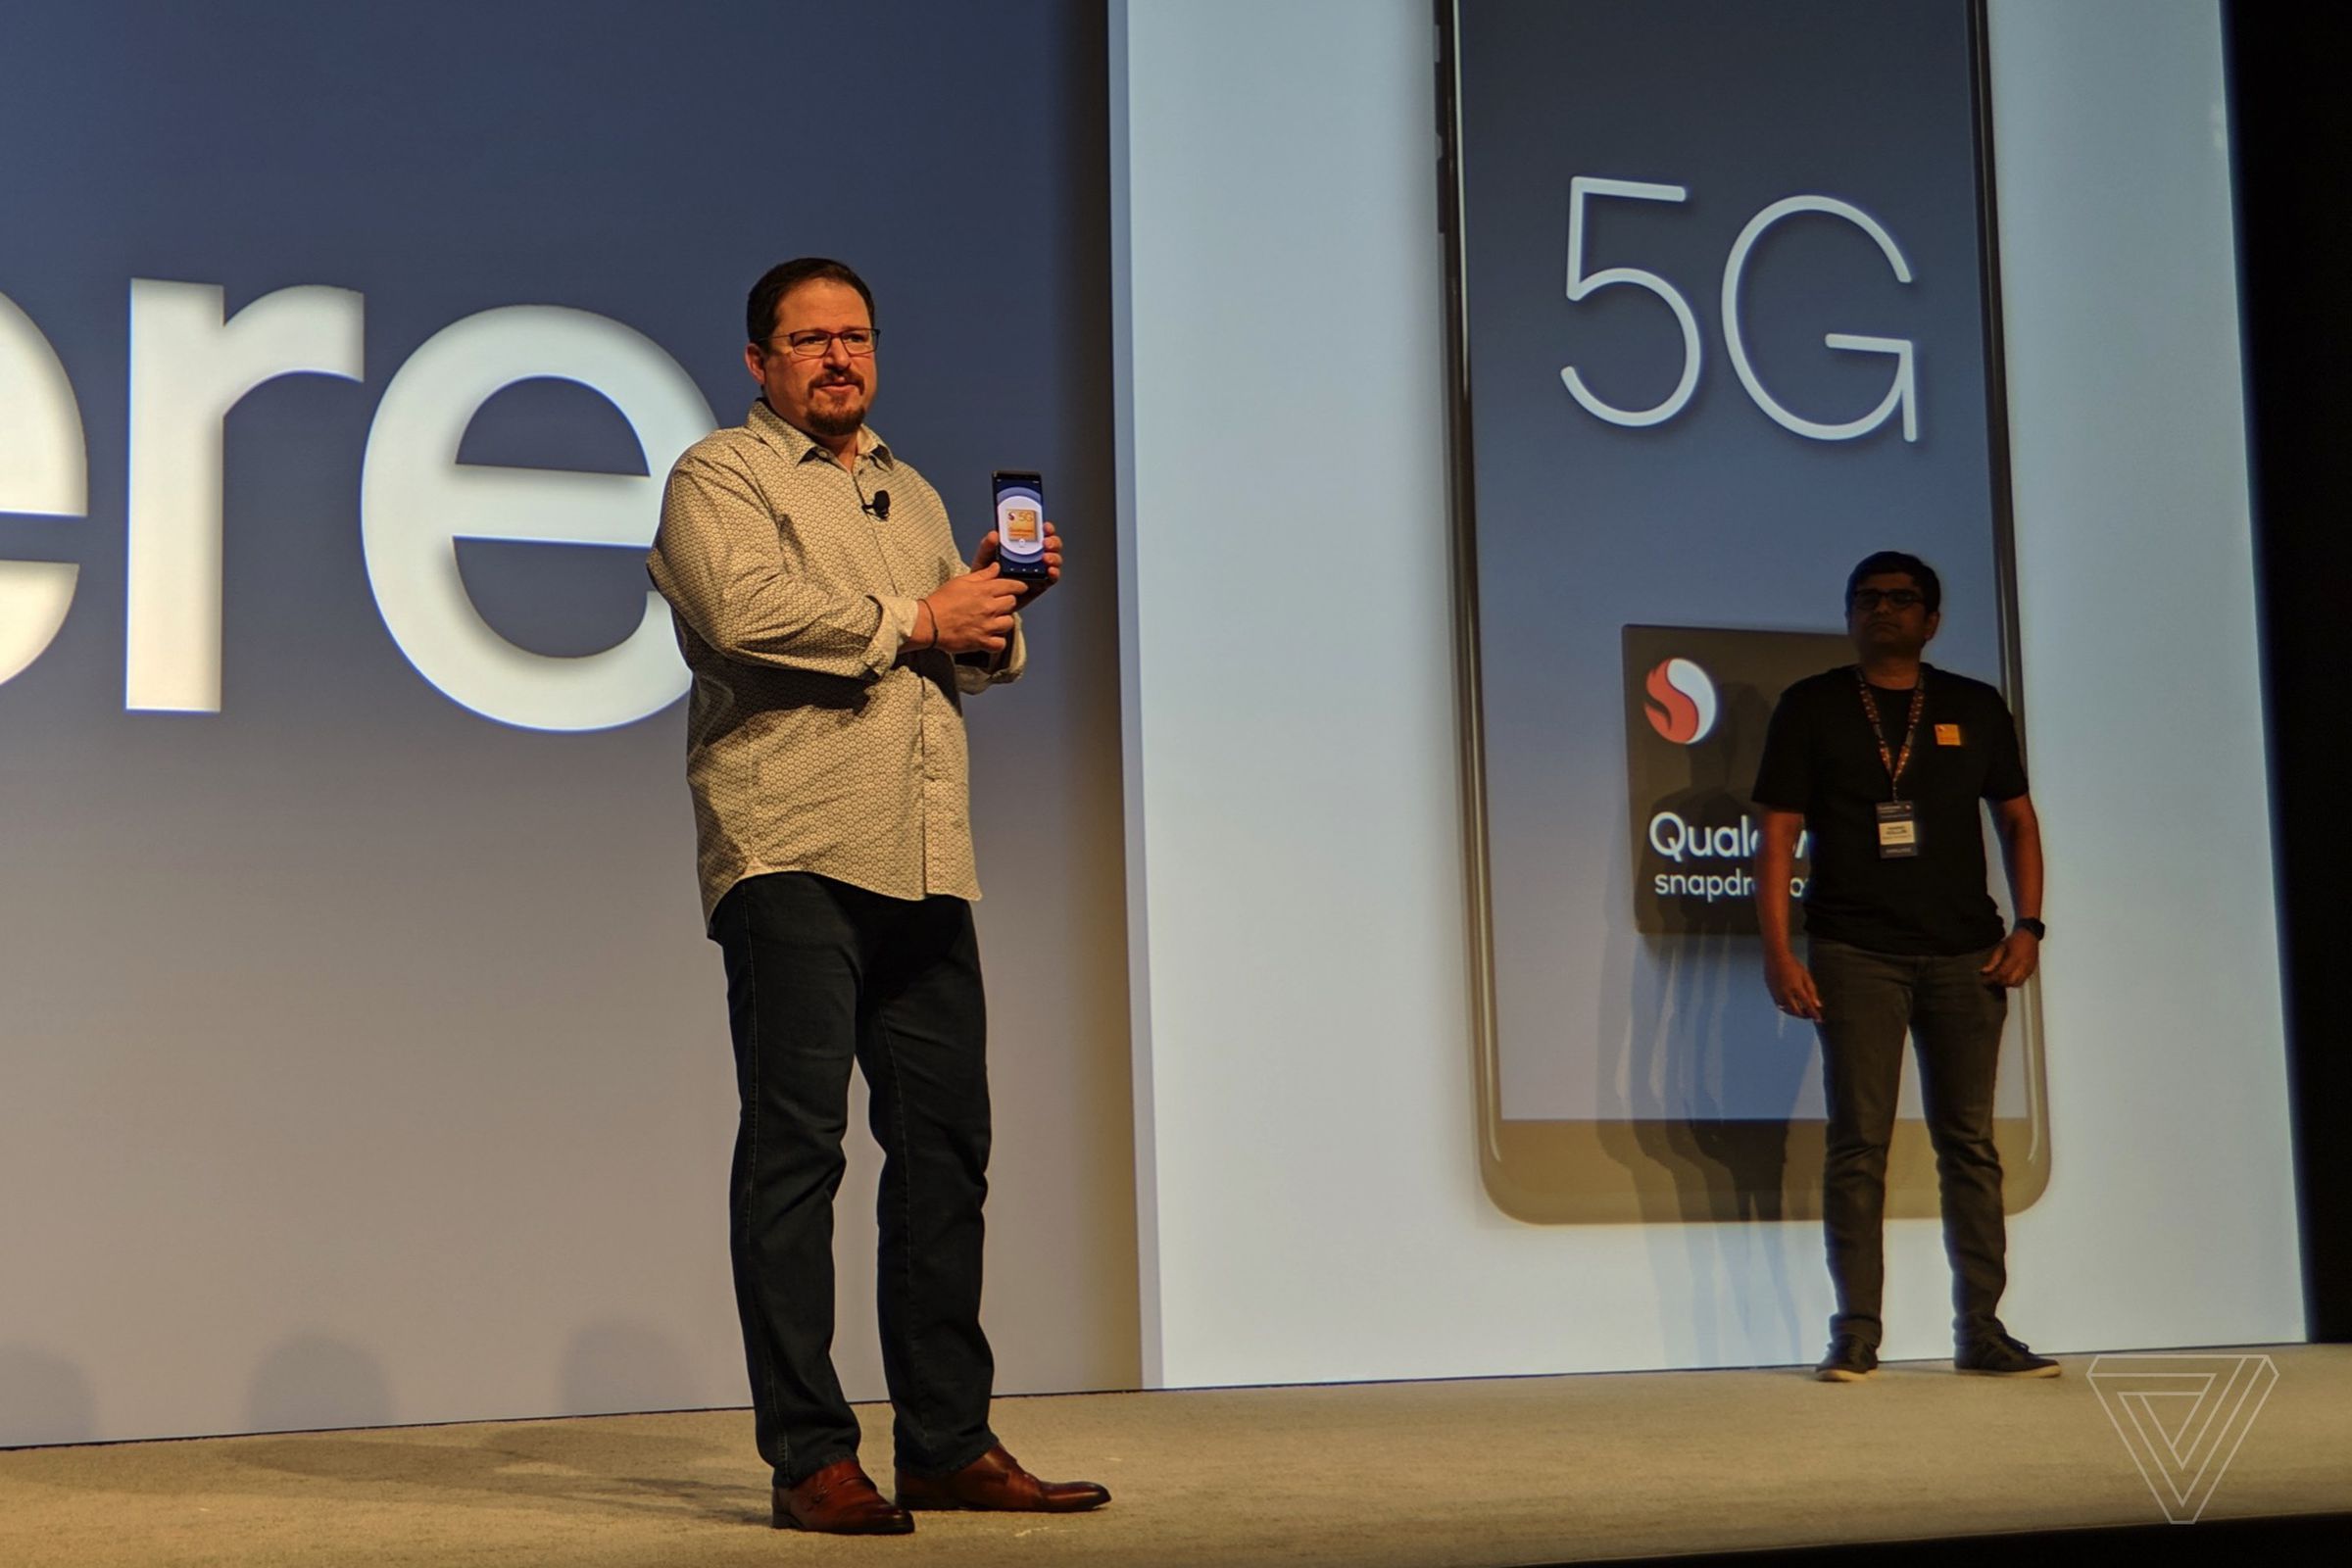 Qualcomm president Cristiano Amon holds the first Snapdragon 855 reference design smartphone.